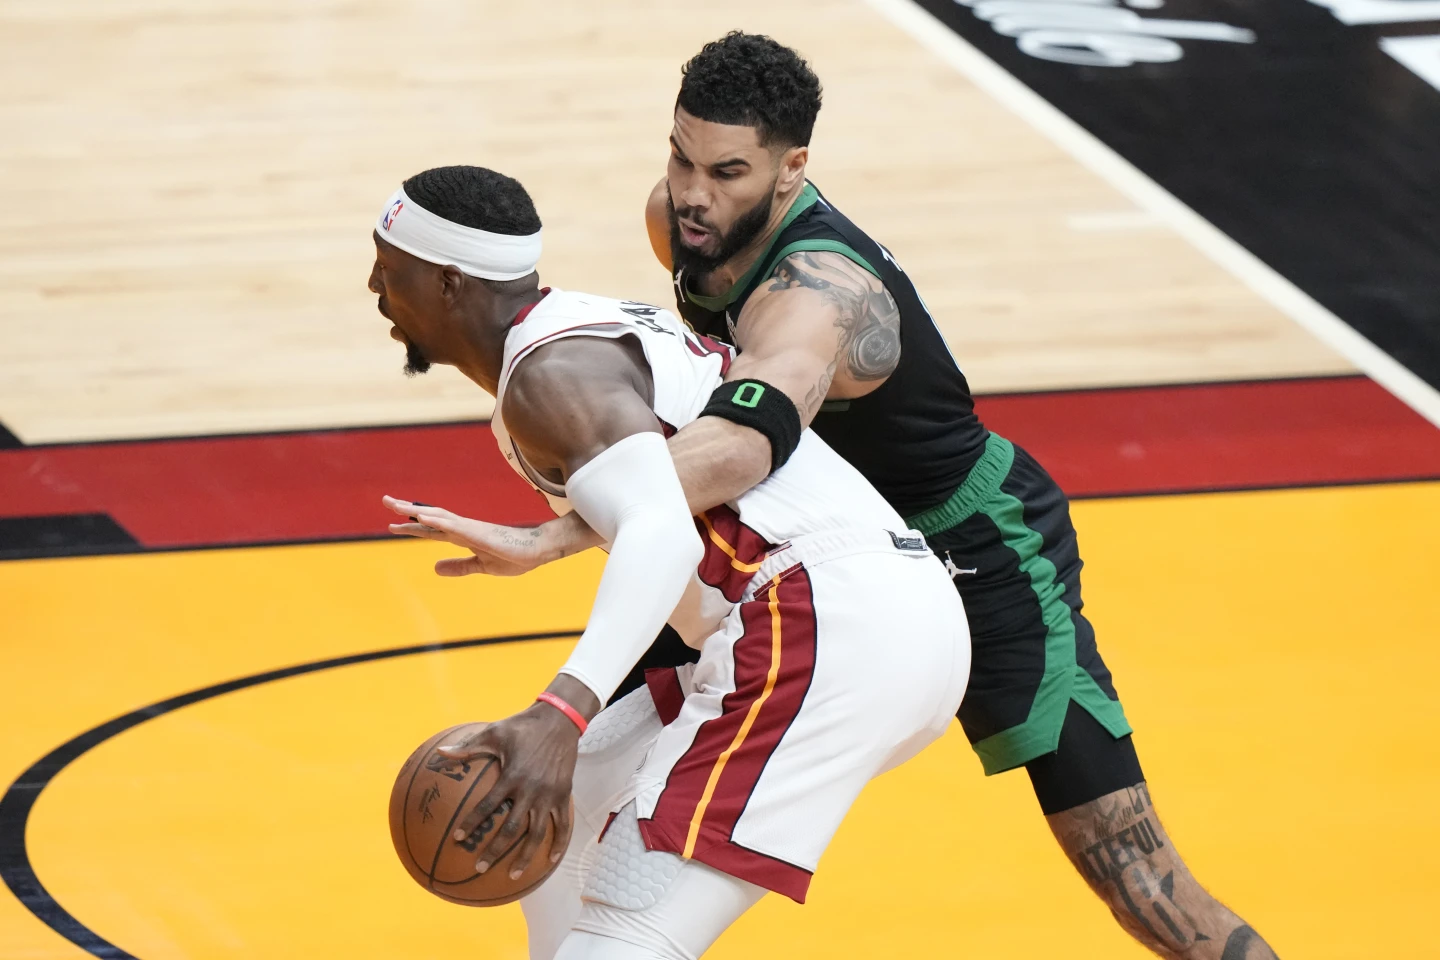 The Boston Celtics maintain a lead from start to finish against Miami Heat, cruising past the